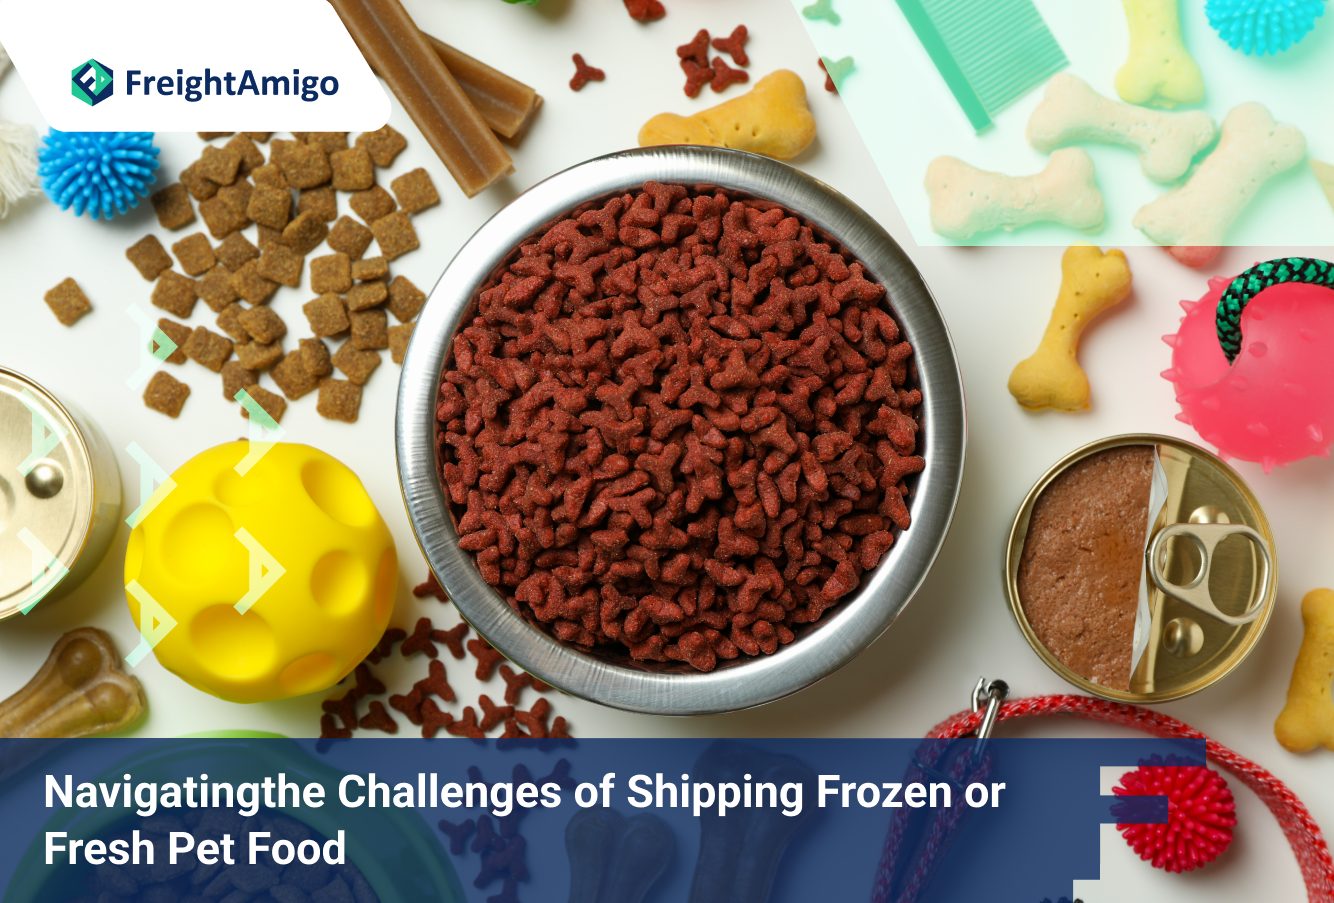 Navigating the Challenges of Shipping Frozen or Fresh Pet Food